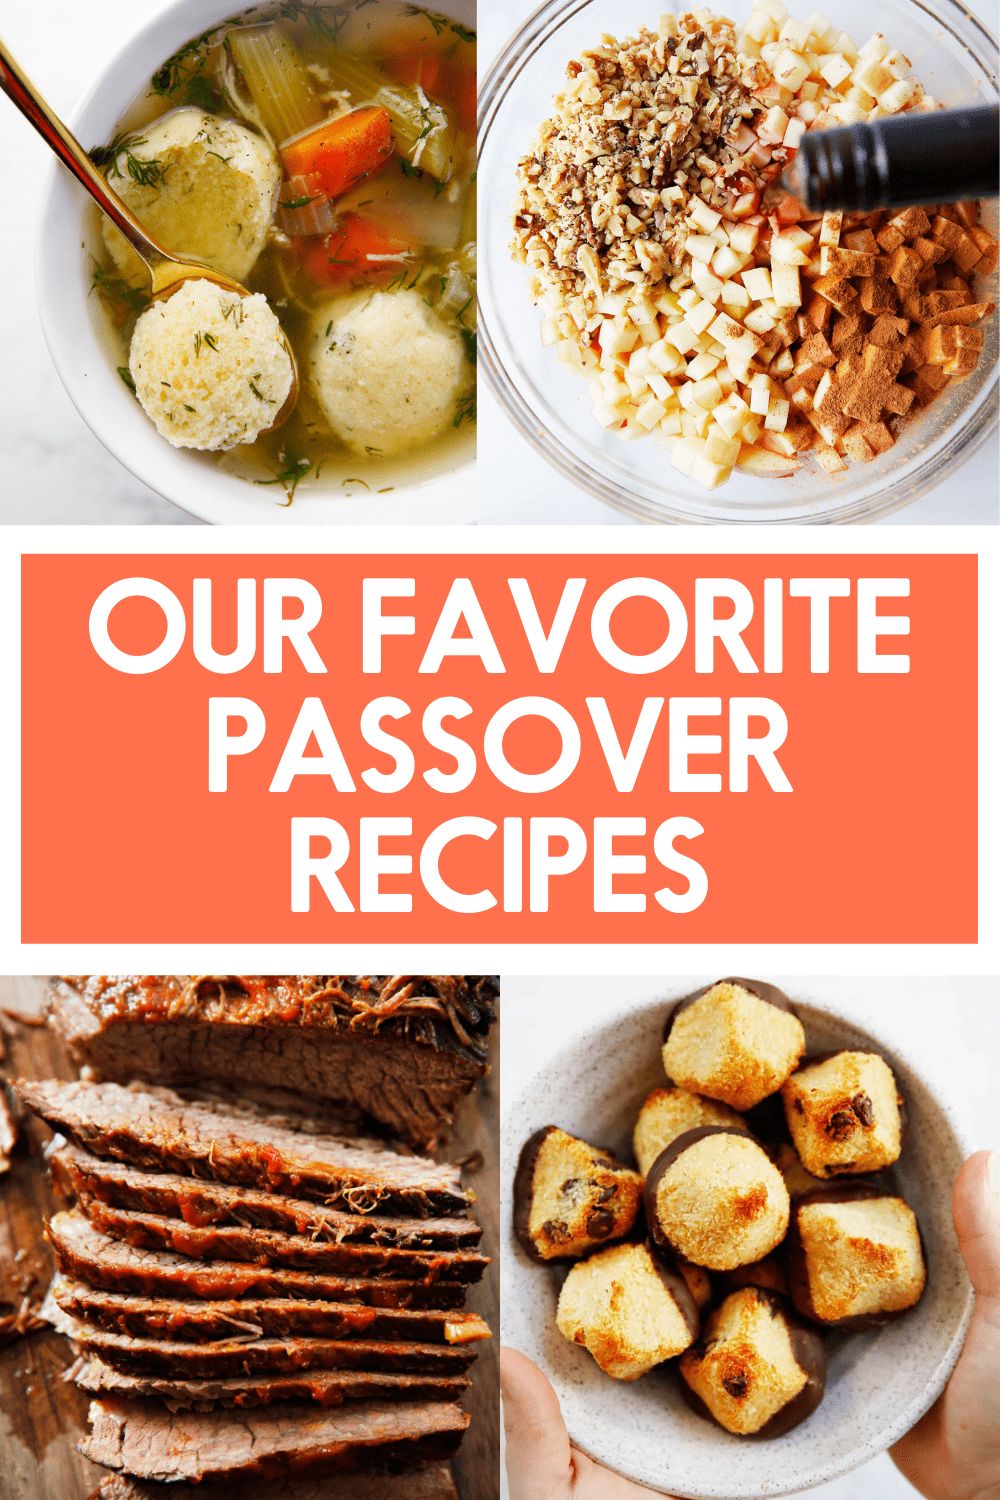 Our Best Passover Recipes